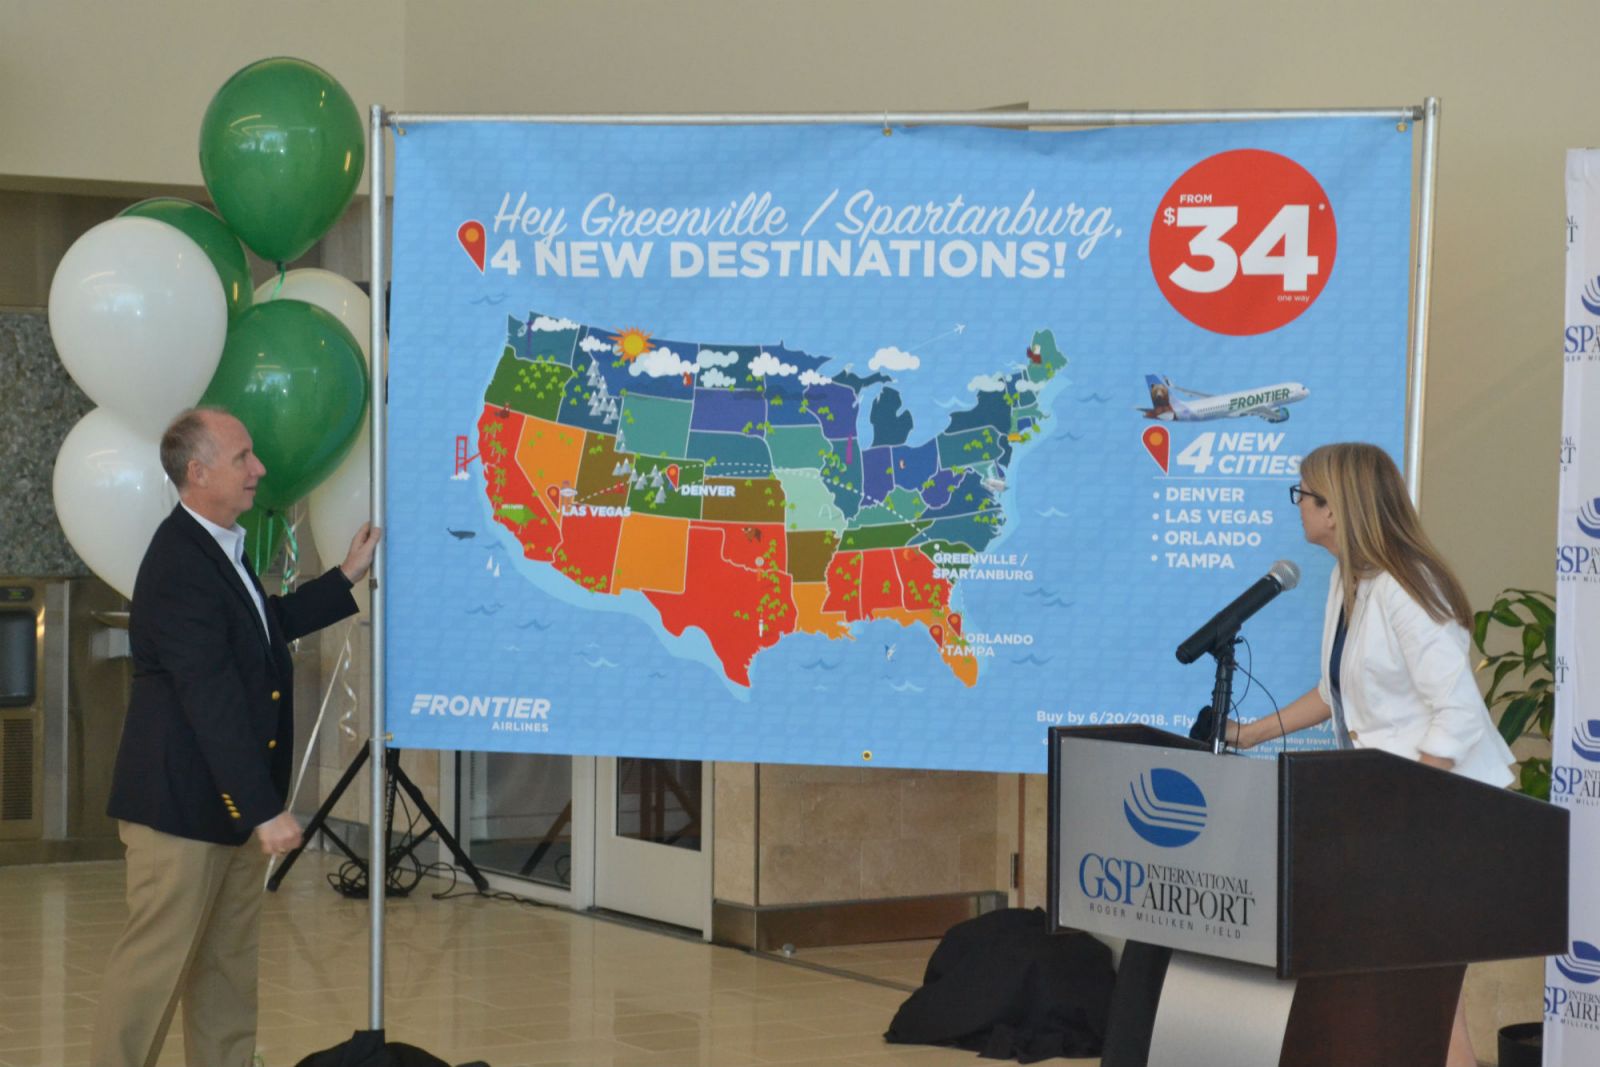 Dave Edwards, president and CEO of GSP, and Tyri Squyres, vice president of marketing for Frontier, announce the new nonstop flights Frontier will offer. (Photo/Ross Norton)